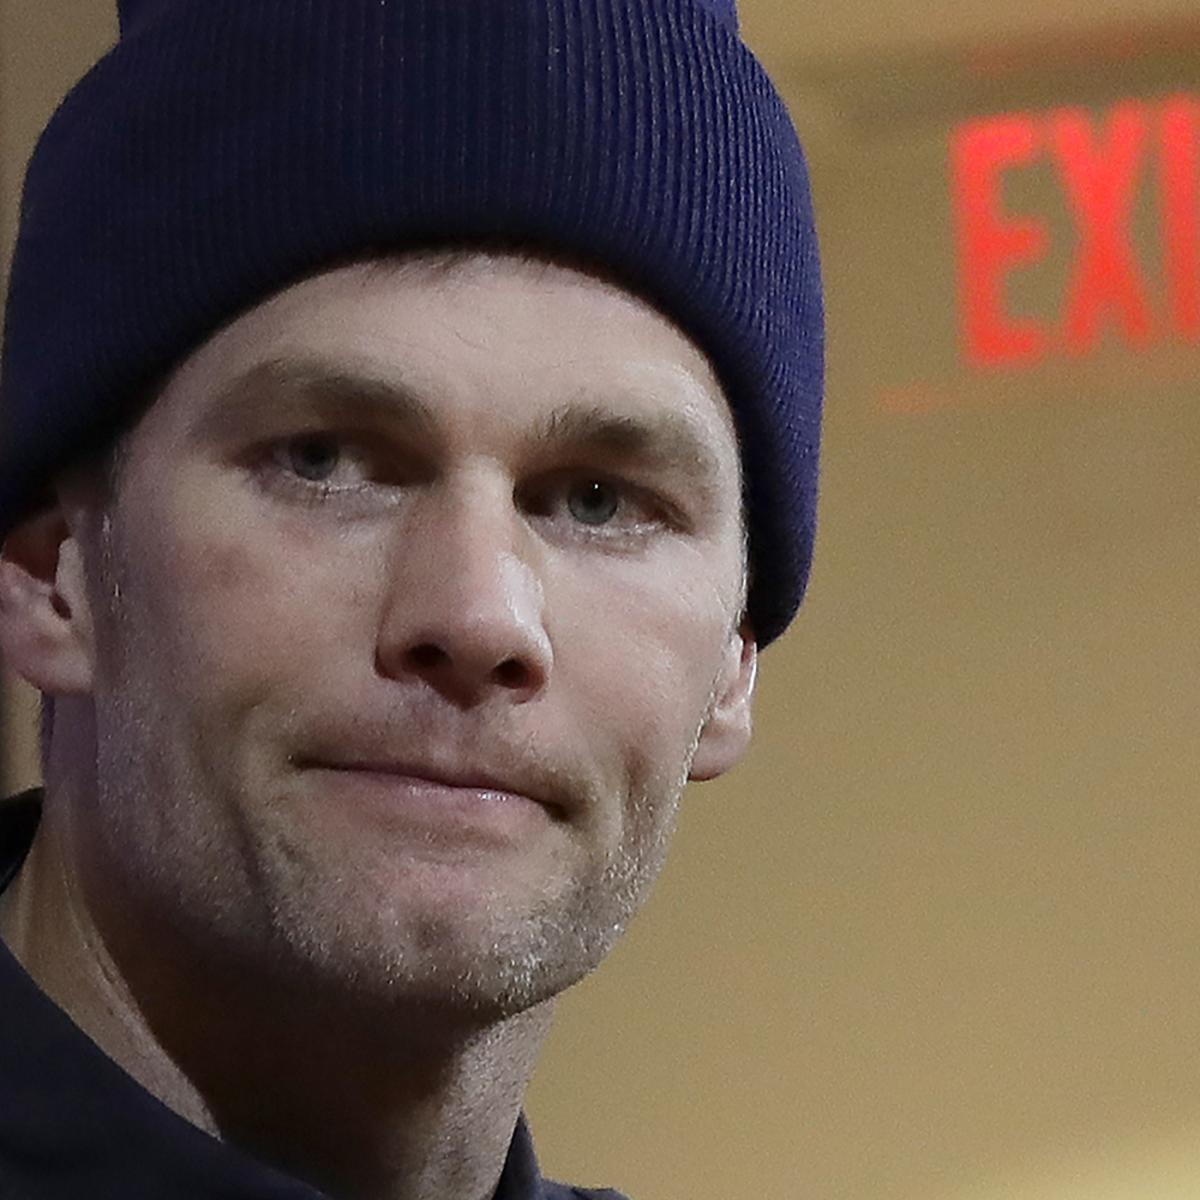 Patriots Are ‘Stunning Mediocre’ After Tom Brady’s Exit for Buccaneers, Says Agent